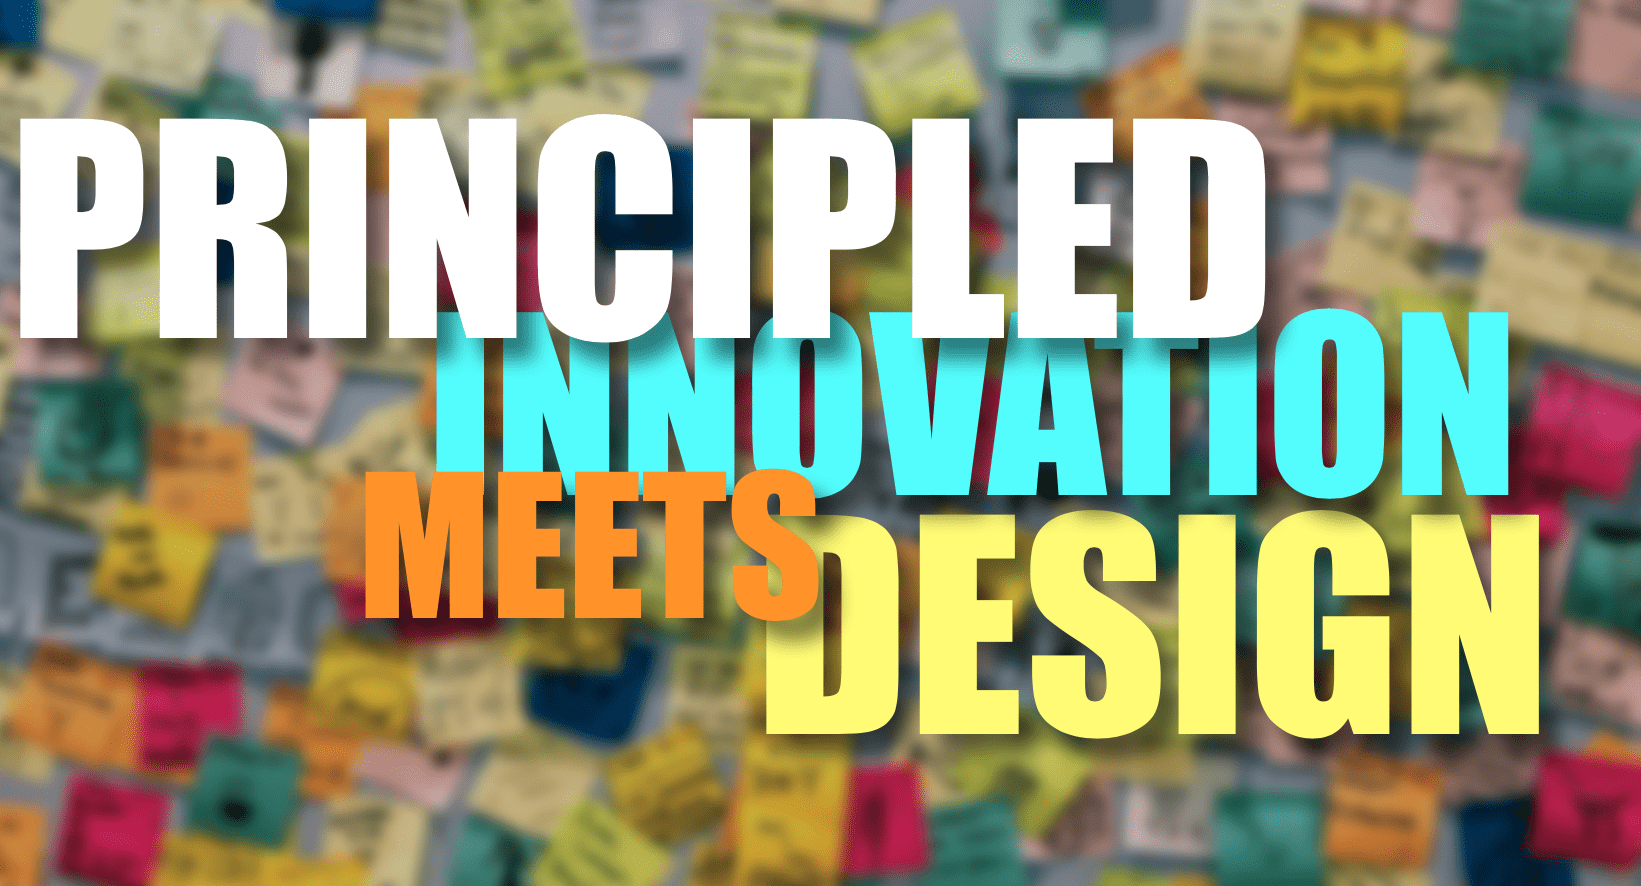 Principled Innovation meets Design: The video